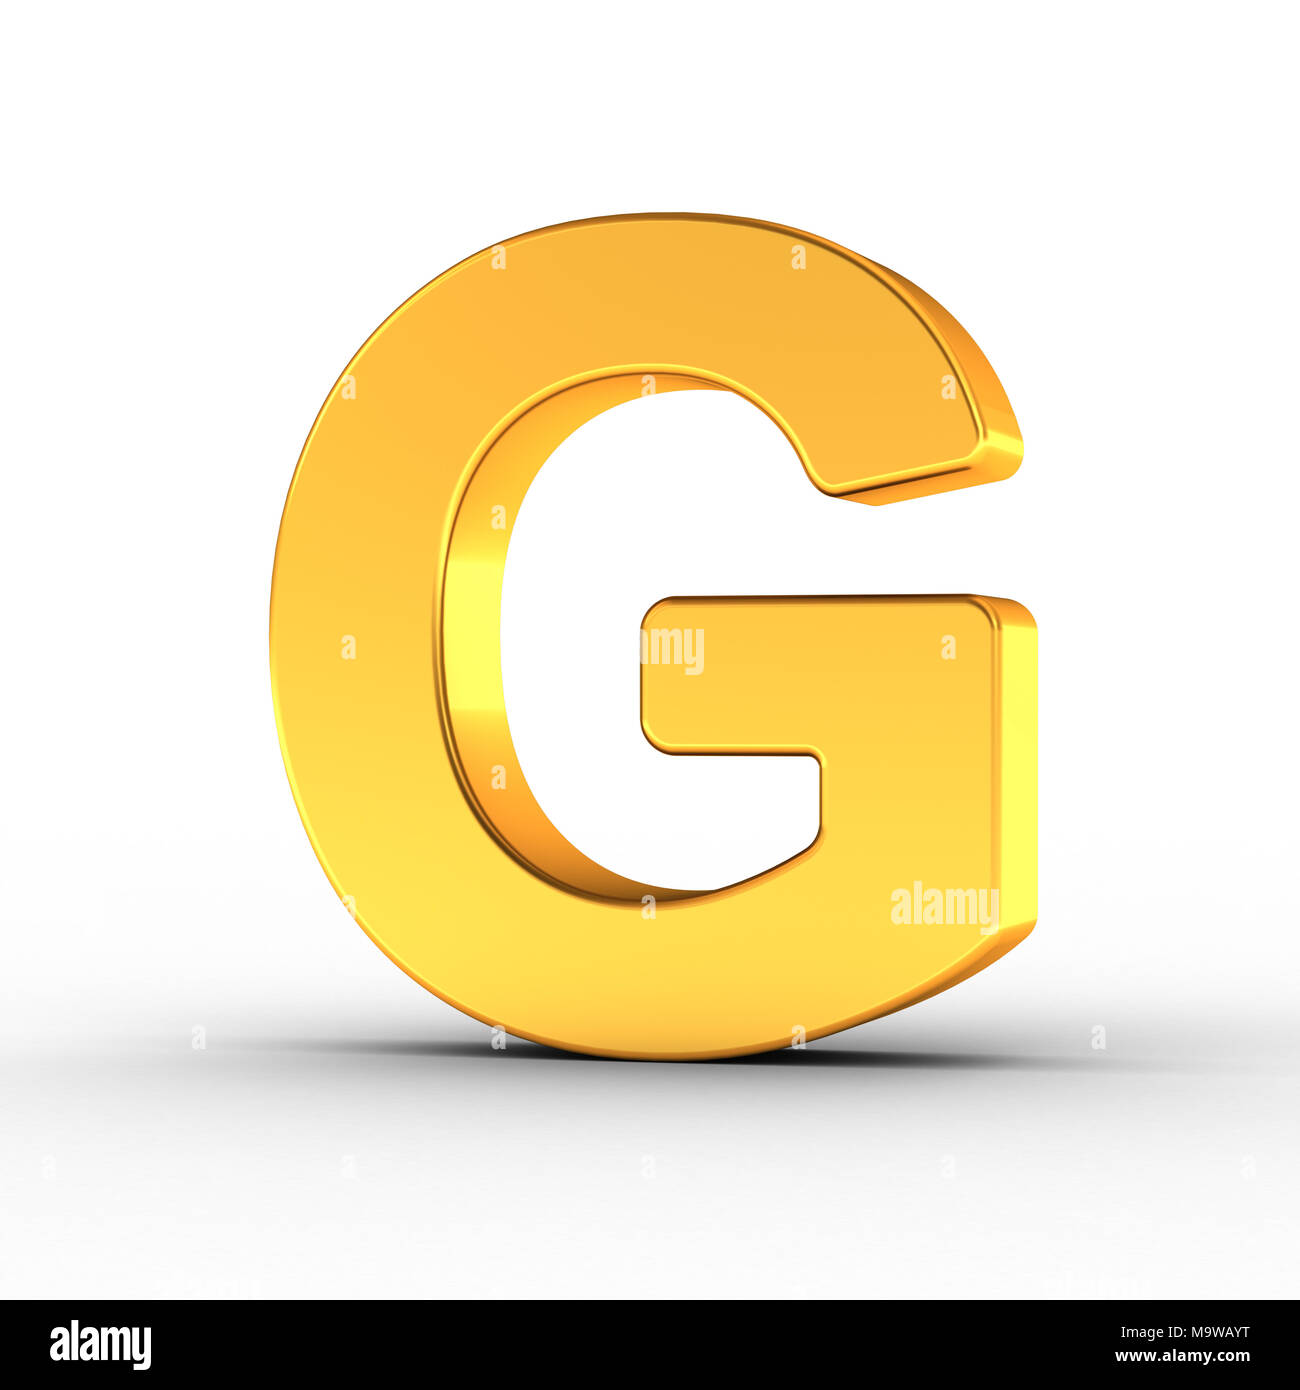 The Letter G as a polished golden object over white background with clipping path for quick and accurate isolation. Stock Photo